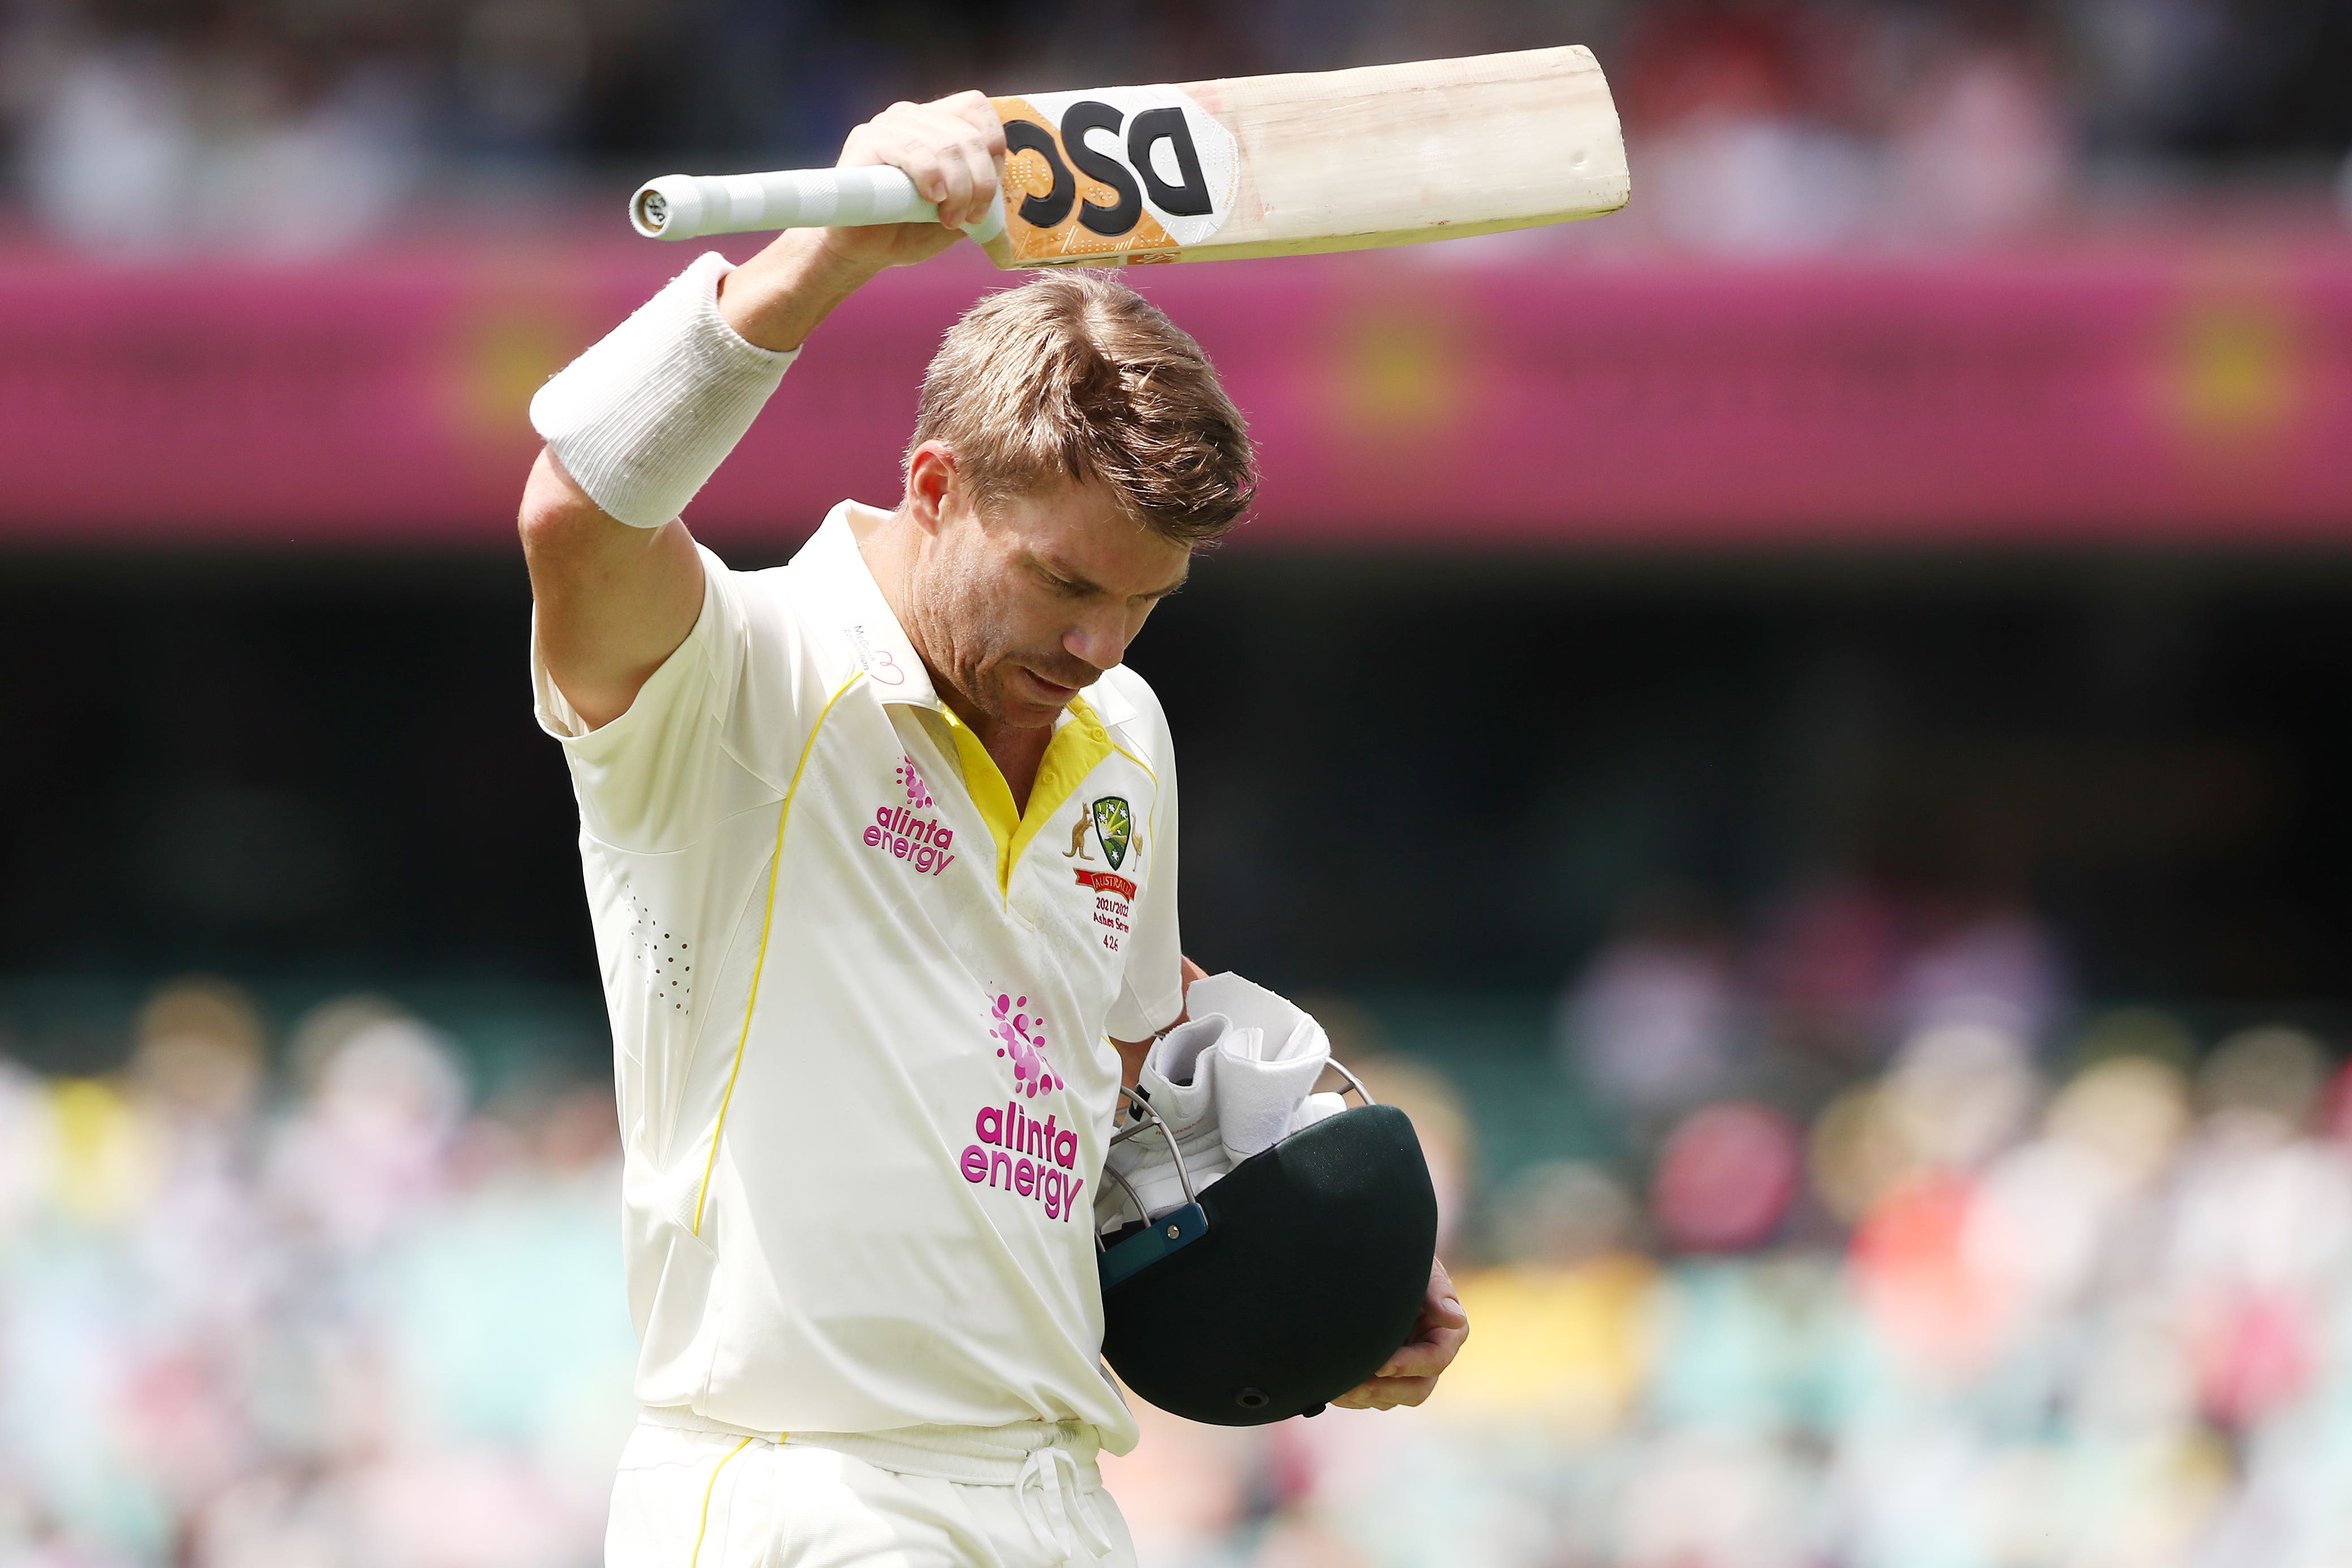 David Warner sets retirement date from Test cricket after Ashes The